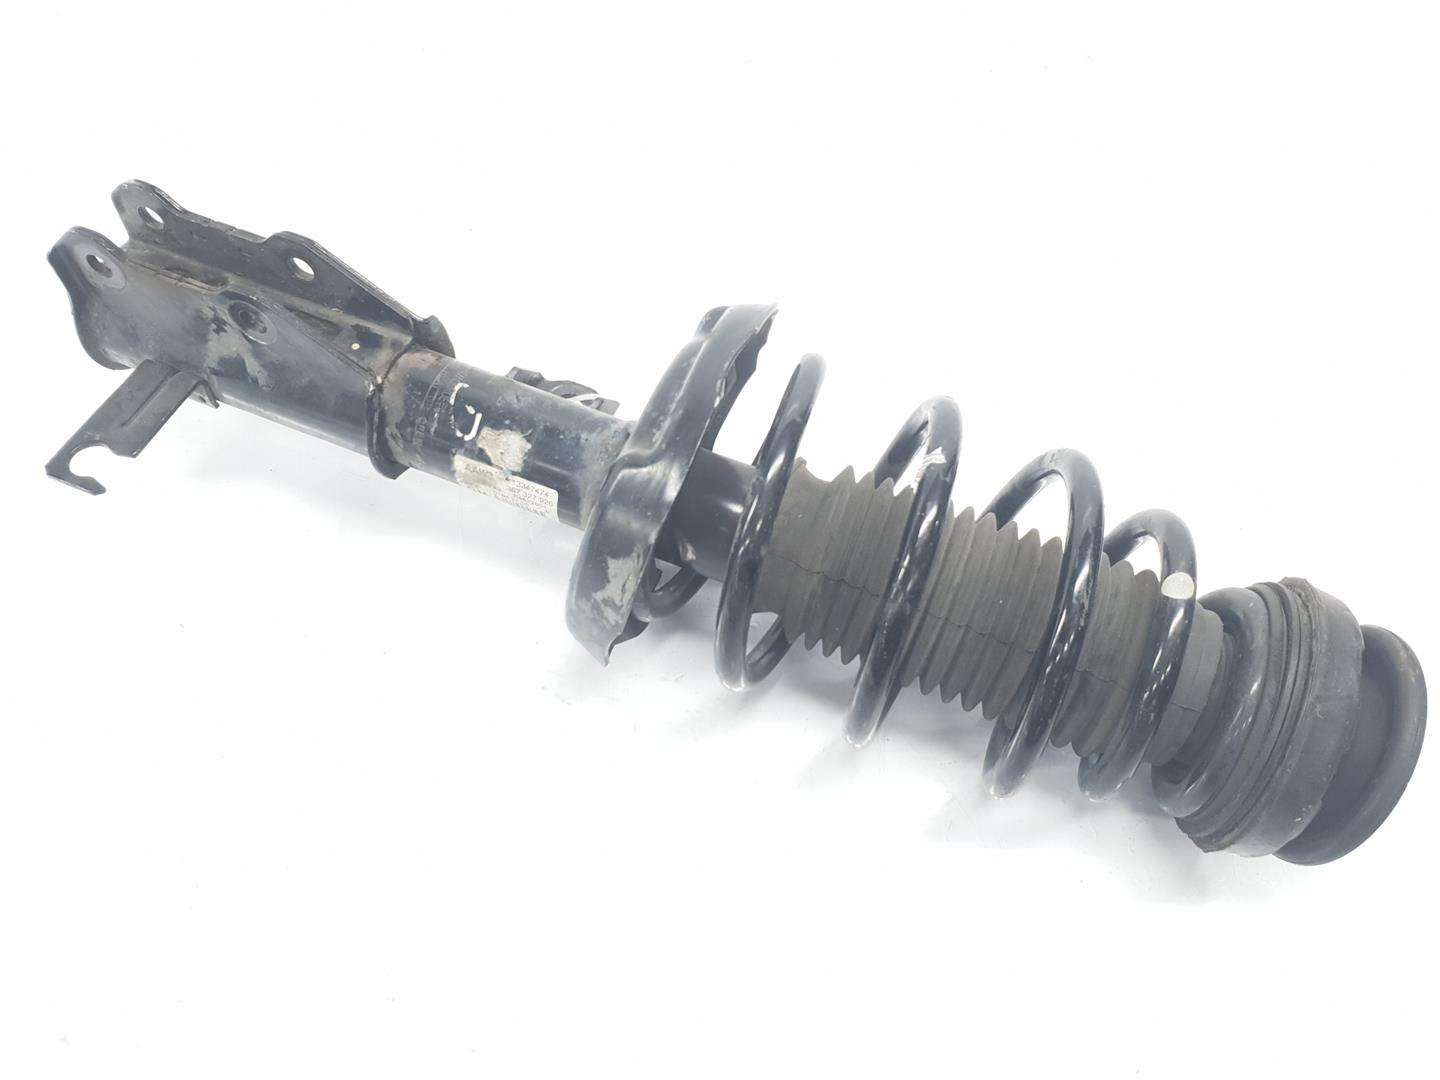 OPEL Insignia A (2008-2016) Front Right Shock Absorber 13347474, 13347474 22963199